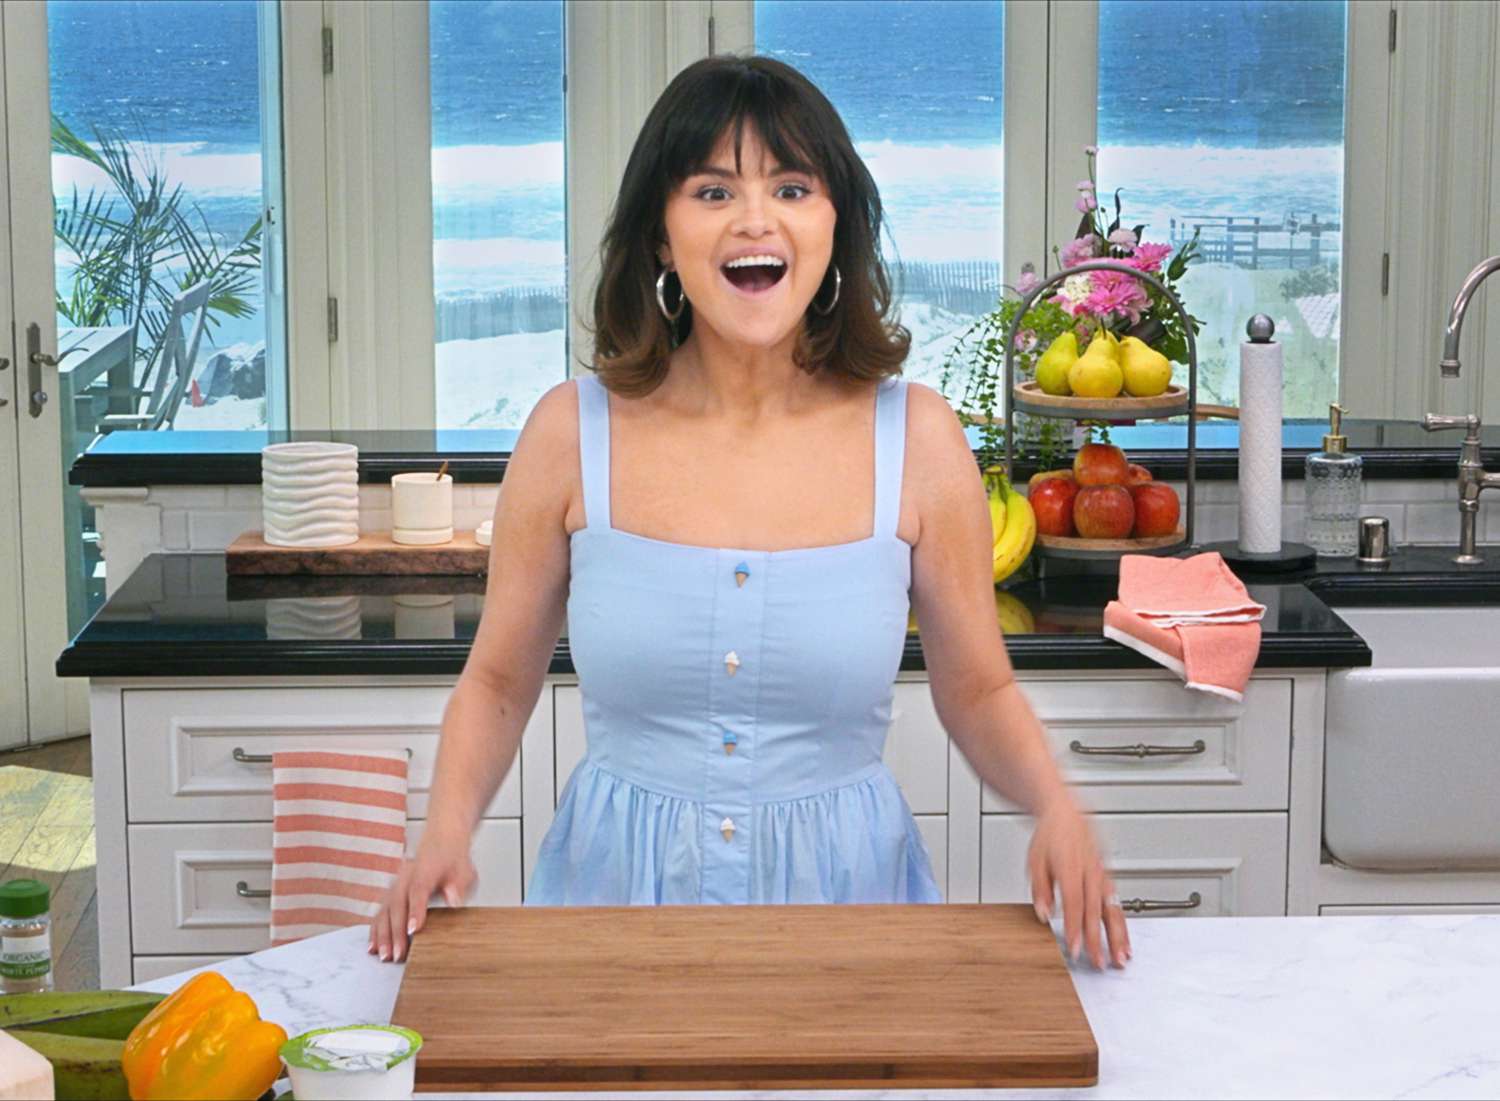 Selena Gomez Says Her Cooking Has 'Come a Long Way'